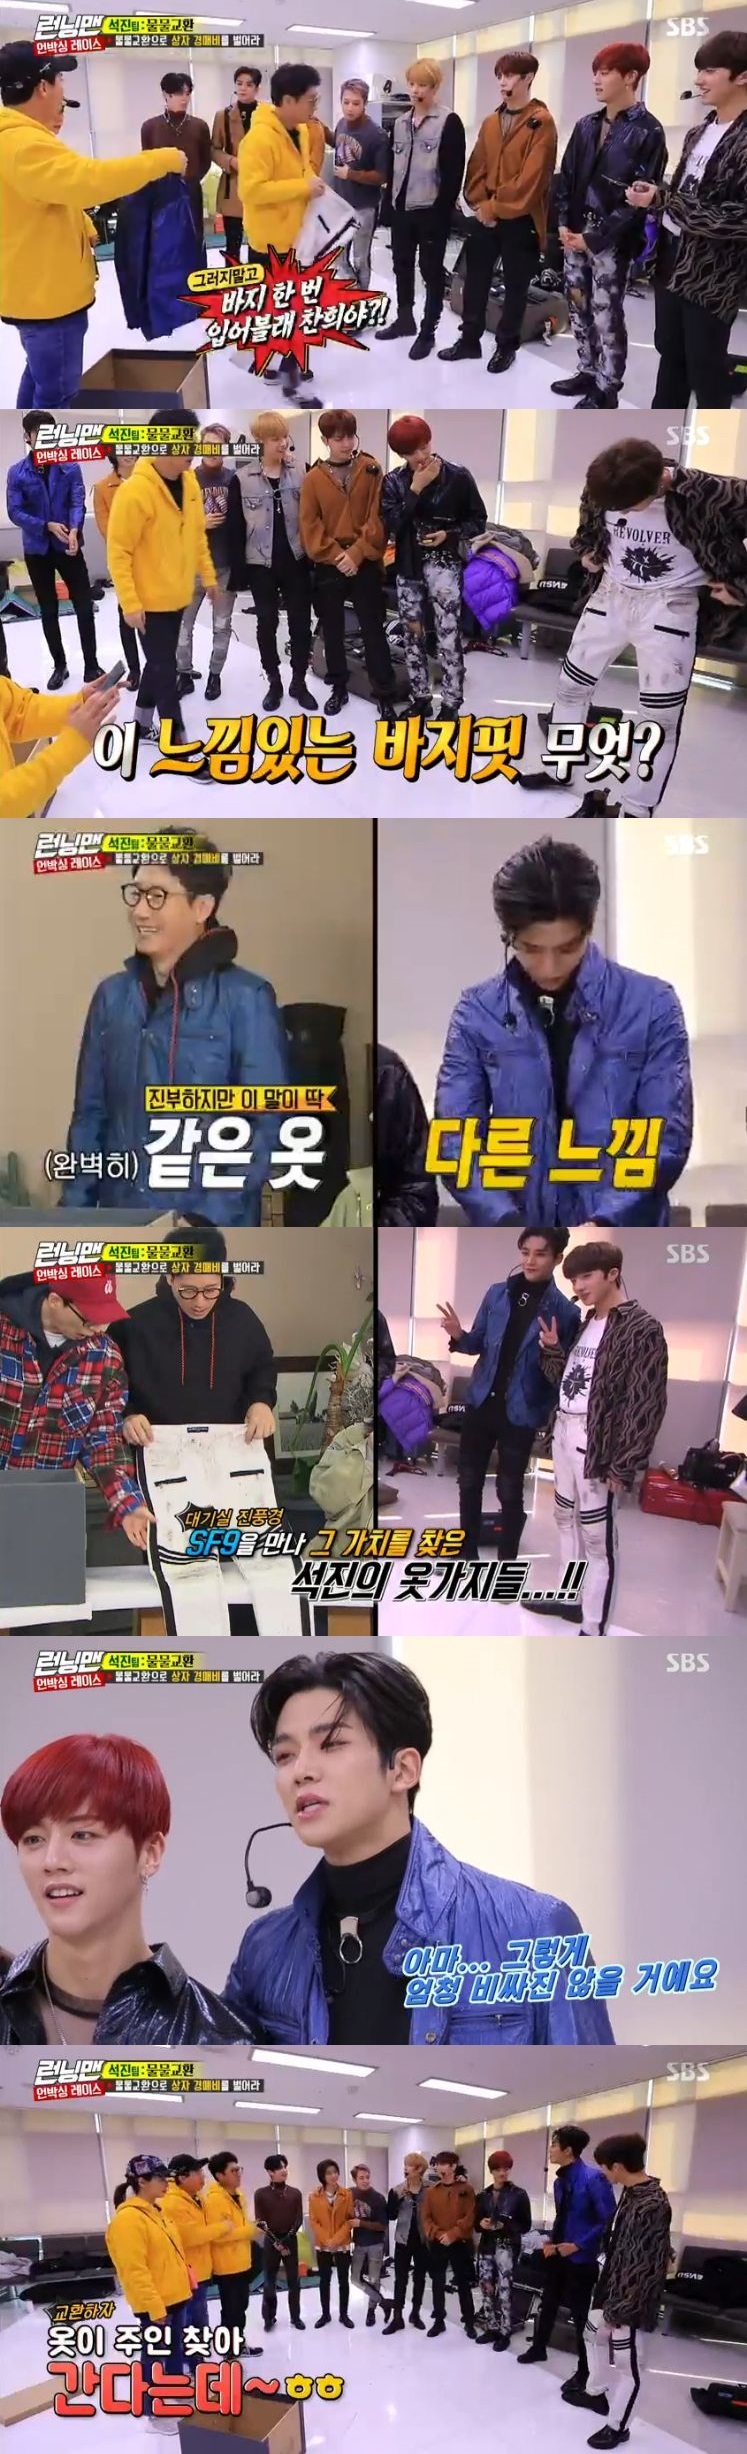 Seoul) = SF9s Roon and Kang Chan-hee have digested Ji Suk-jins old costumes.On the 17th, at 5 pm SBS Running Man, the members confrontation was held on the theme of secret of unboxing box.On this day, the production team sent the members to bring one item in advance.Ji Suk-jin brought Jumper and pants that he wore as a young man, but the members were surprised by the sparkling Jumper and the bleak pants that were far from the current trend.Ji Suk-jin later found the set of The Show and attempted to barter in the SF9 waiting room.Roone and Kang Chan-hee tried on Ji Suk-jins costumes, and made them surprise with a different level of fit than when Ji Suk-jin wore them.